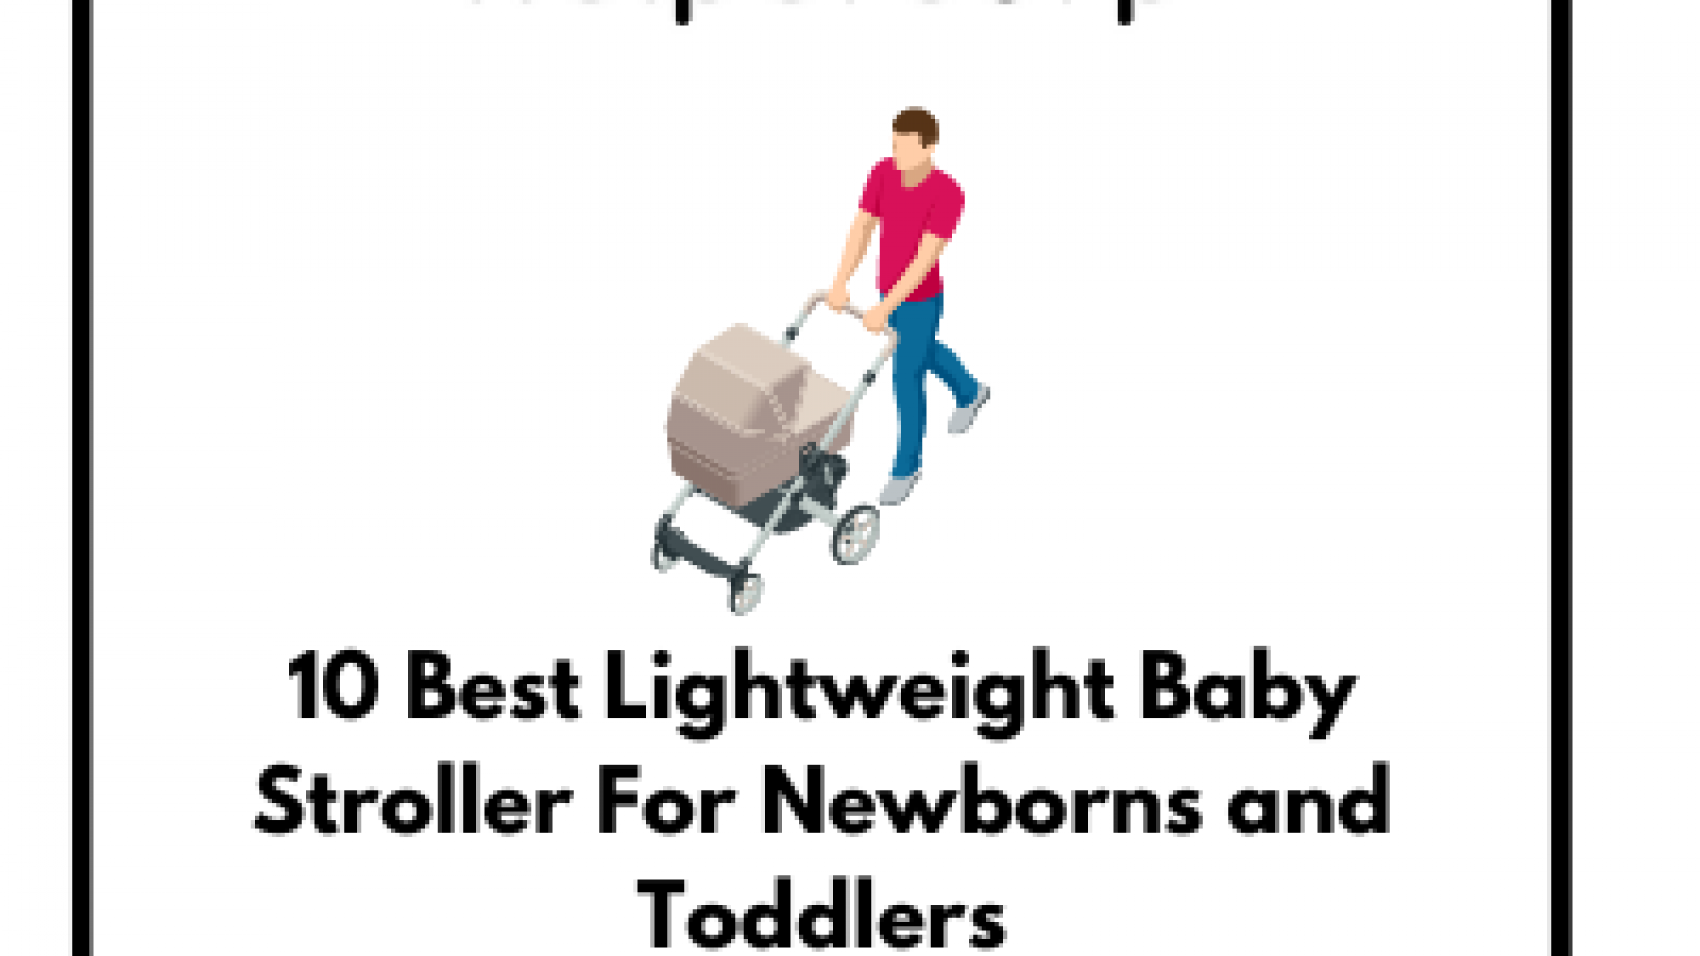 10-Best-Lightweight-Baby-Stroller-For-Newborns-and-Toddlers